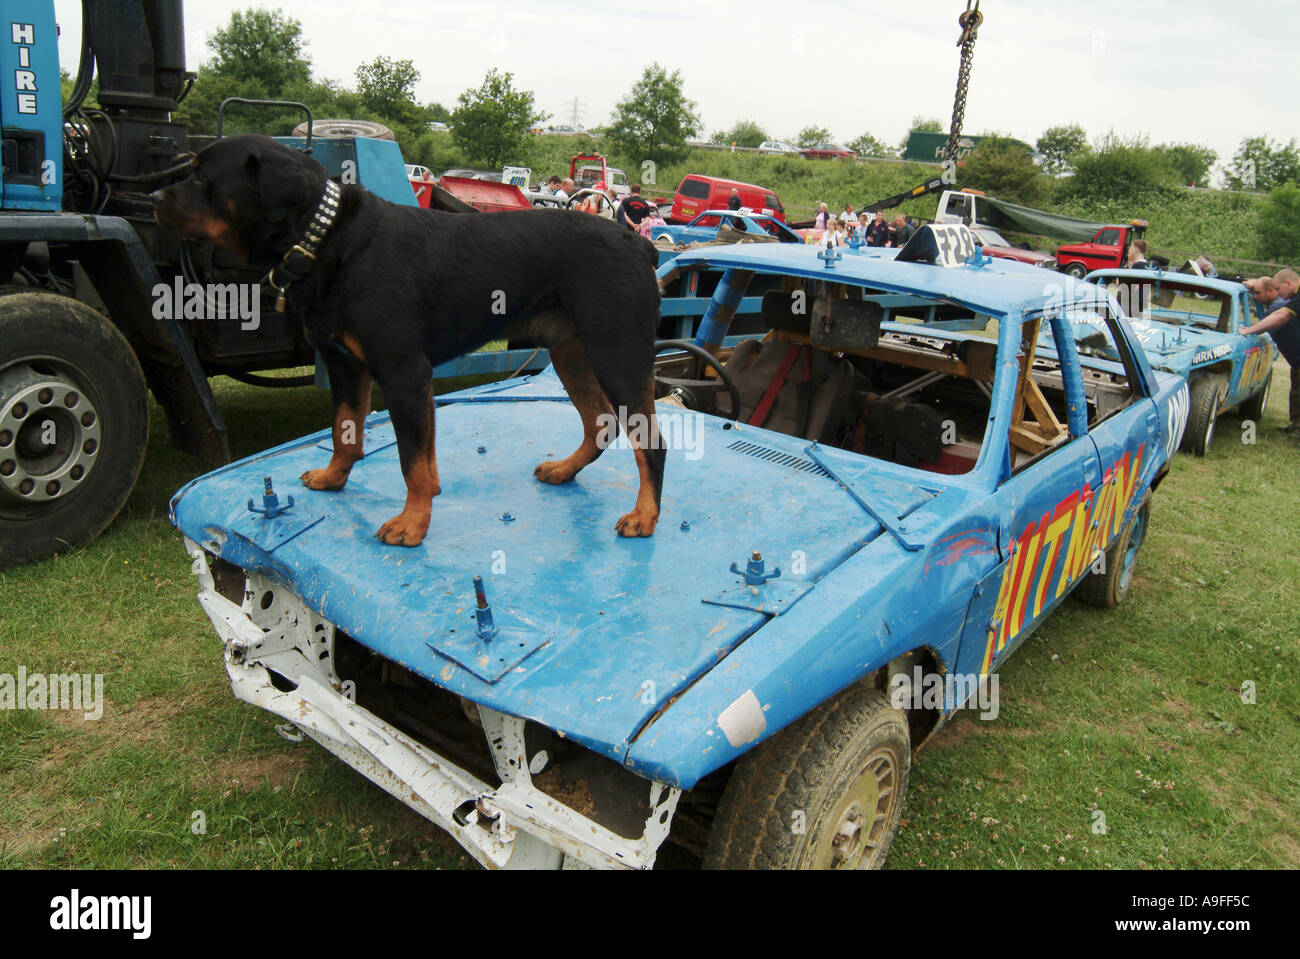 What is junk car racing?